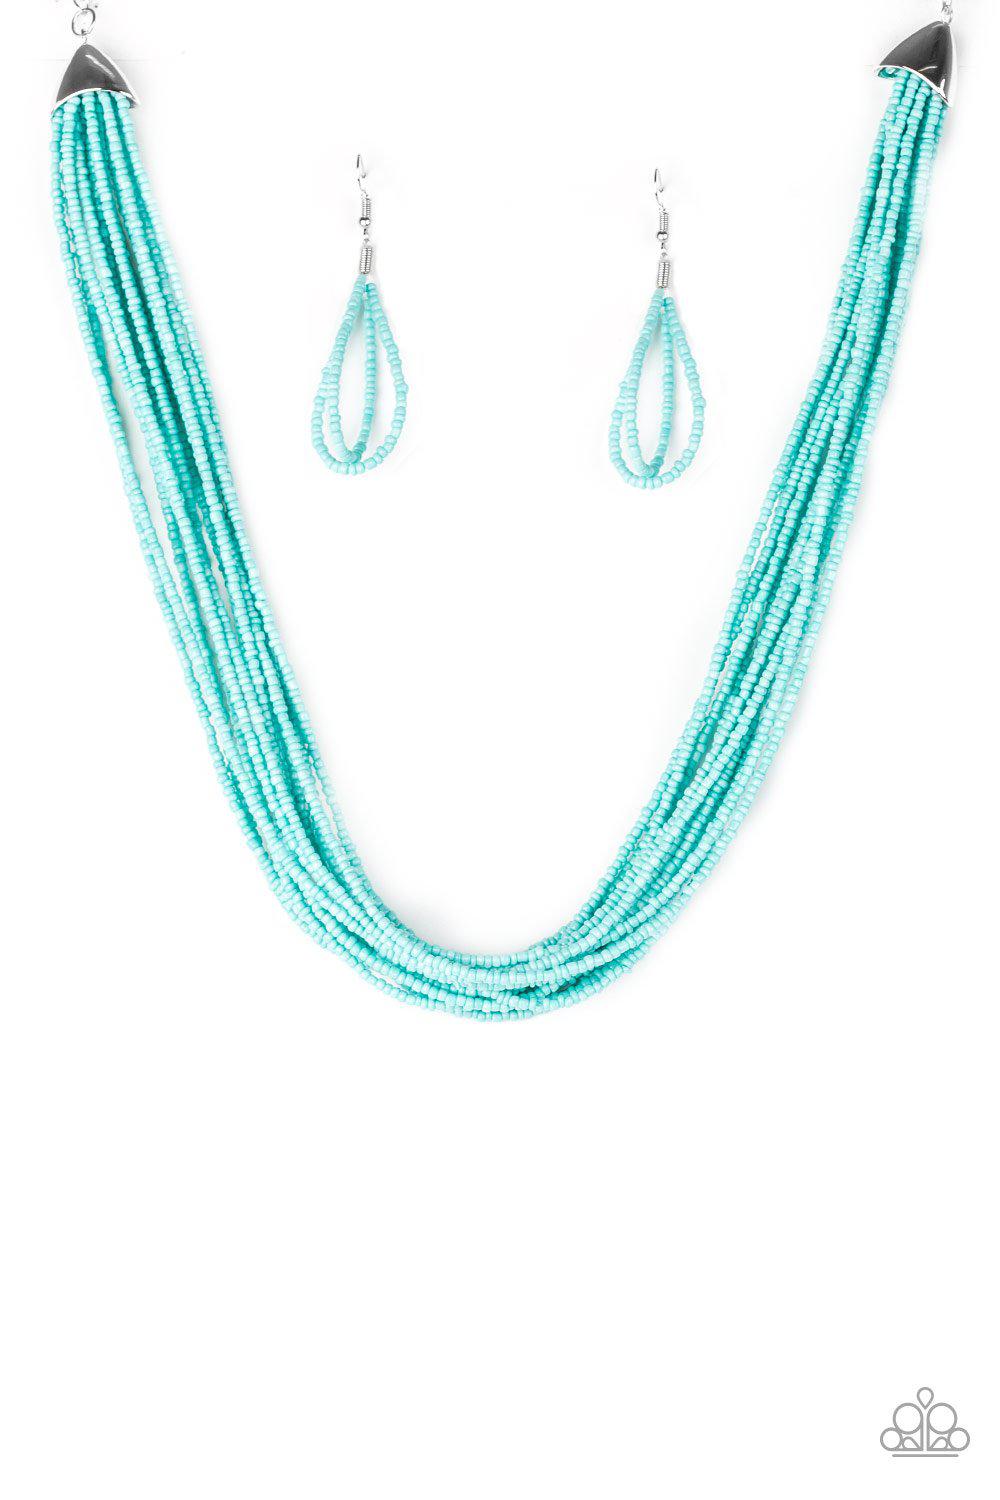 Wide Open Spaces Turquoise Blue Seed Bead Necklace and matching Earrings - Paparazzi Accessories-CarasShop.com - $5 Jewelry by Cara Jewels